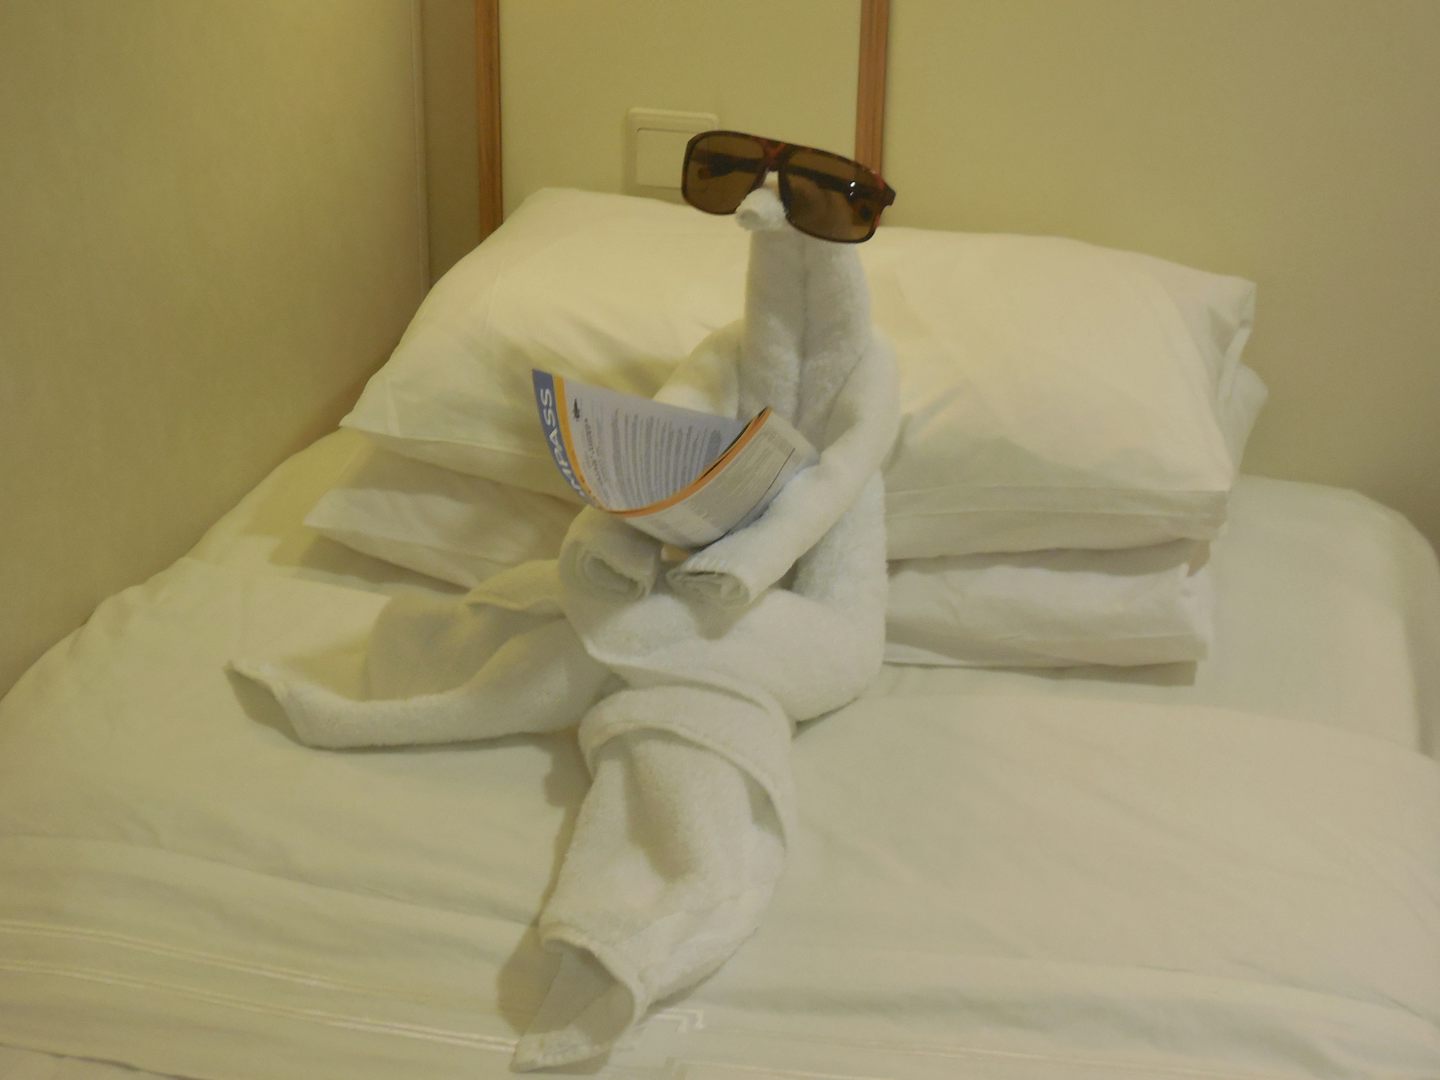 The towel animals were always a joy to behold.